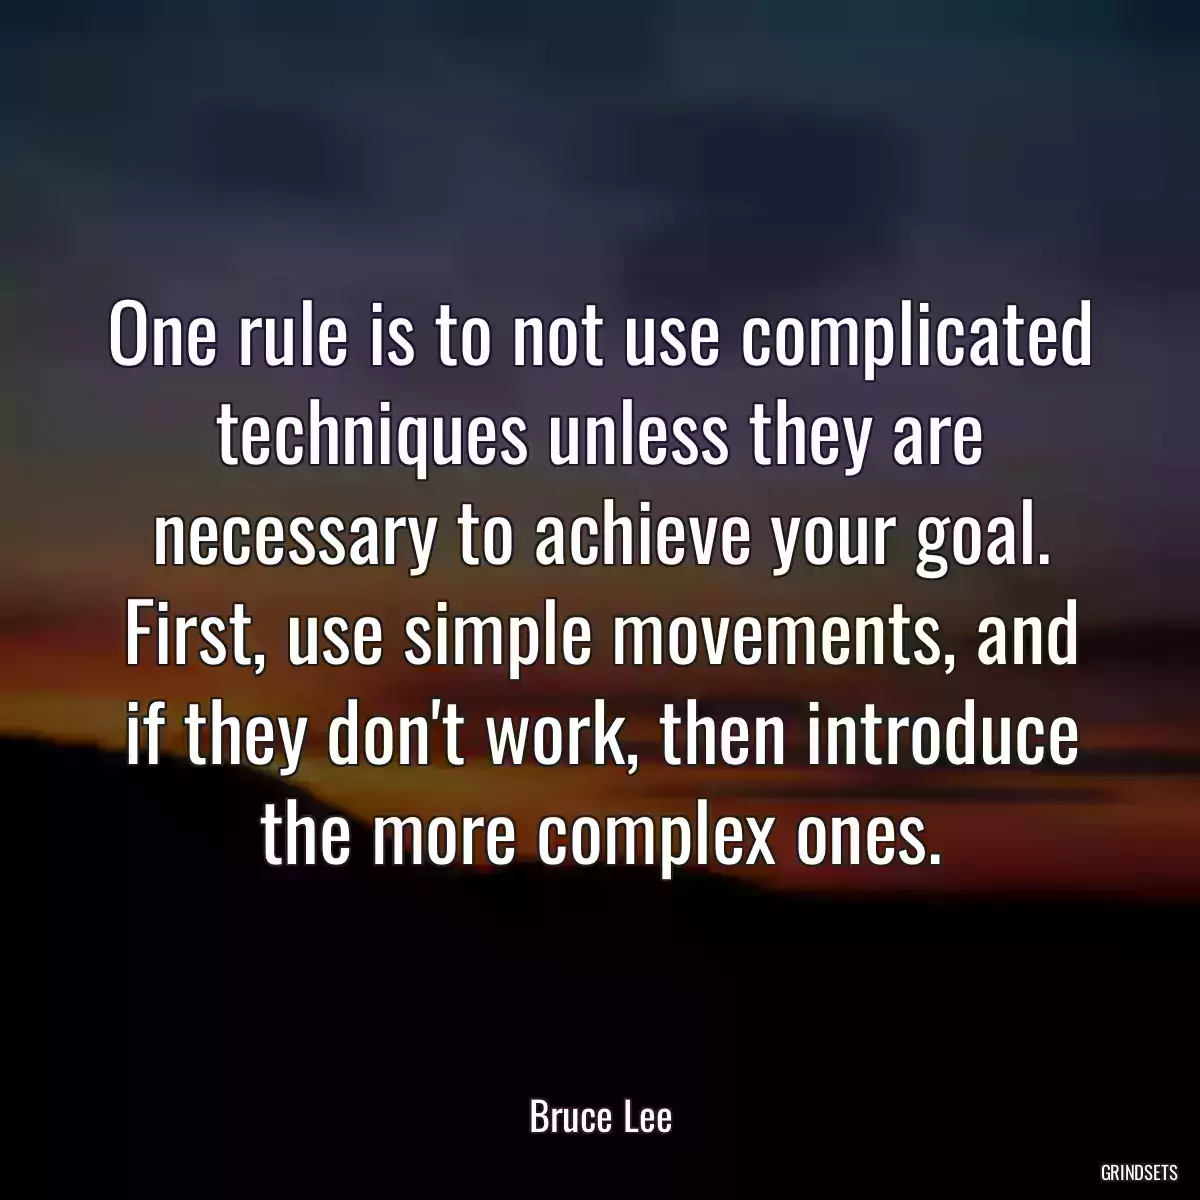 One rule is to not use complicated techniques unless they are necessary to achieve your goal. First, use simple movements, and if they don\'t work, then introduce the more complex ones.